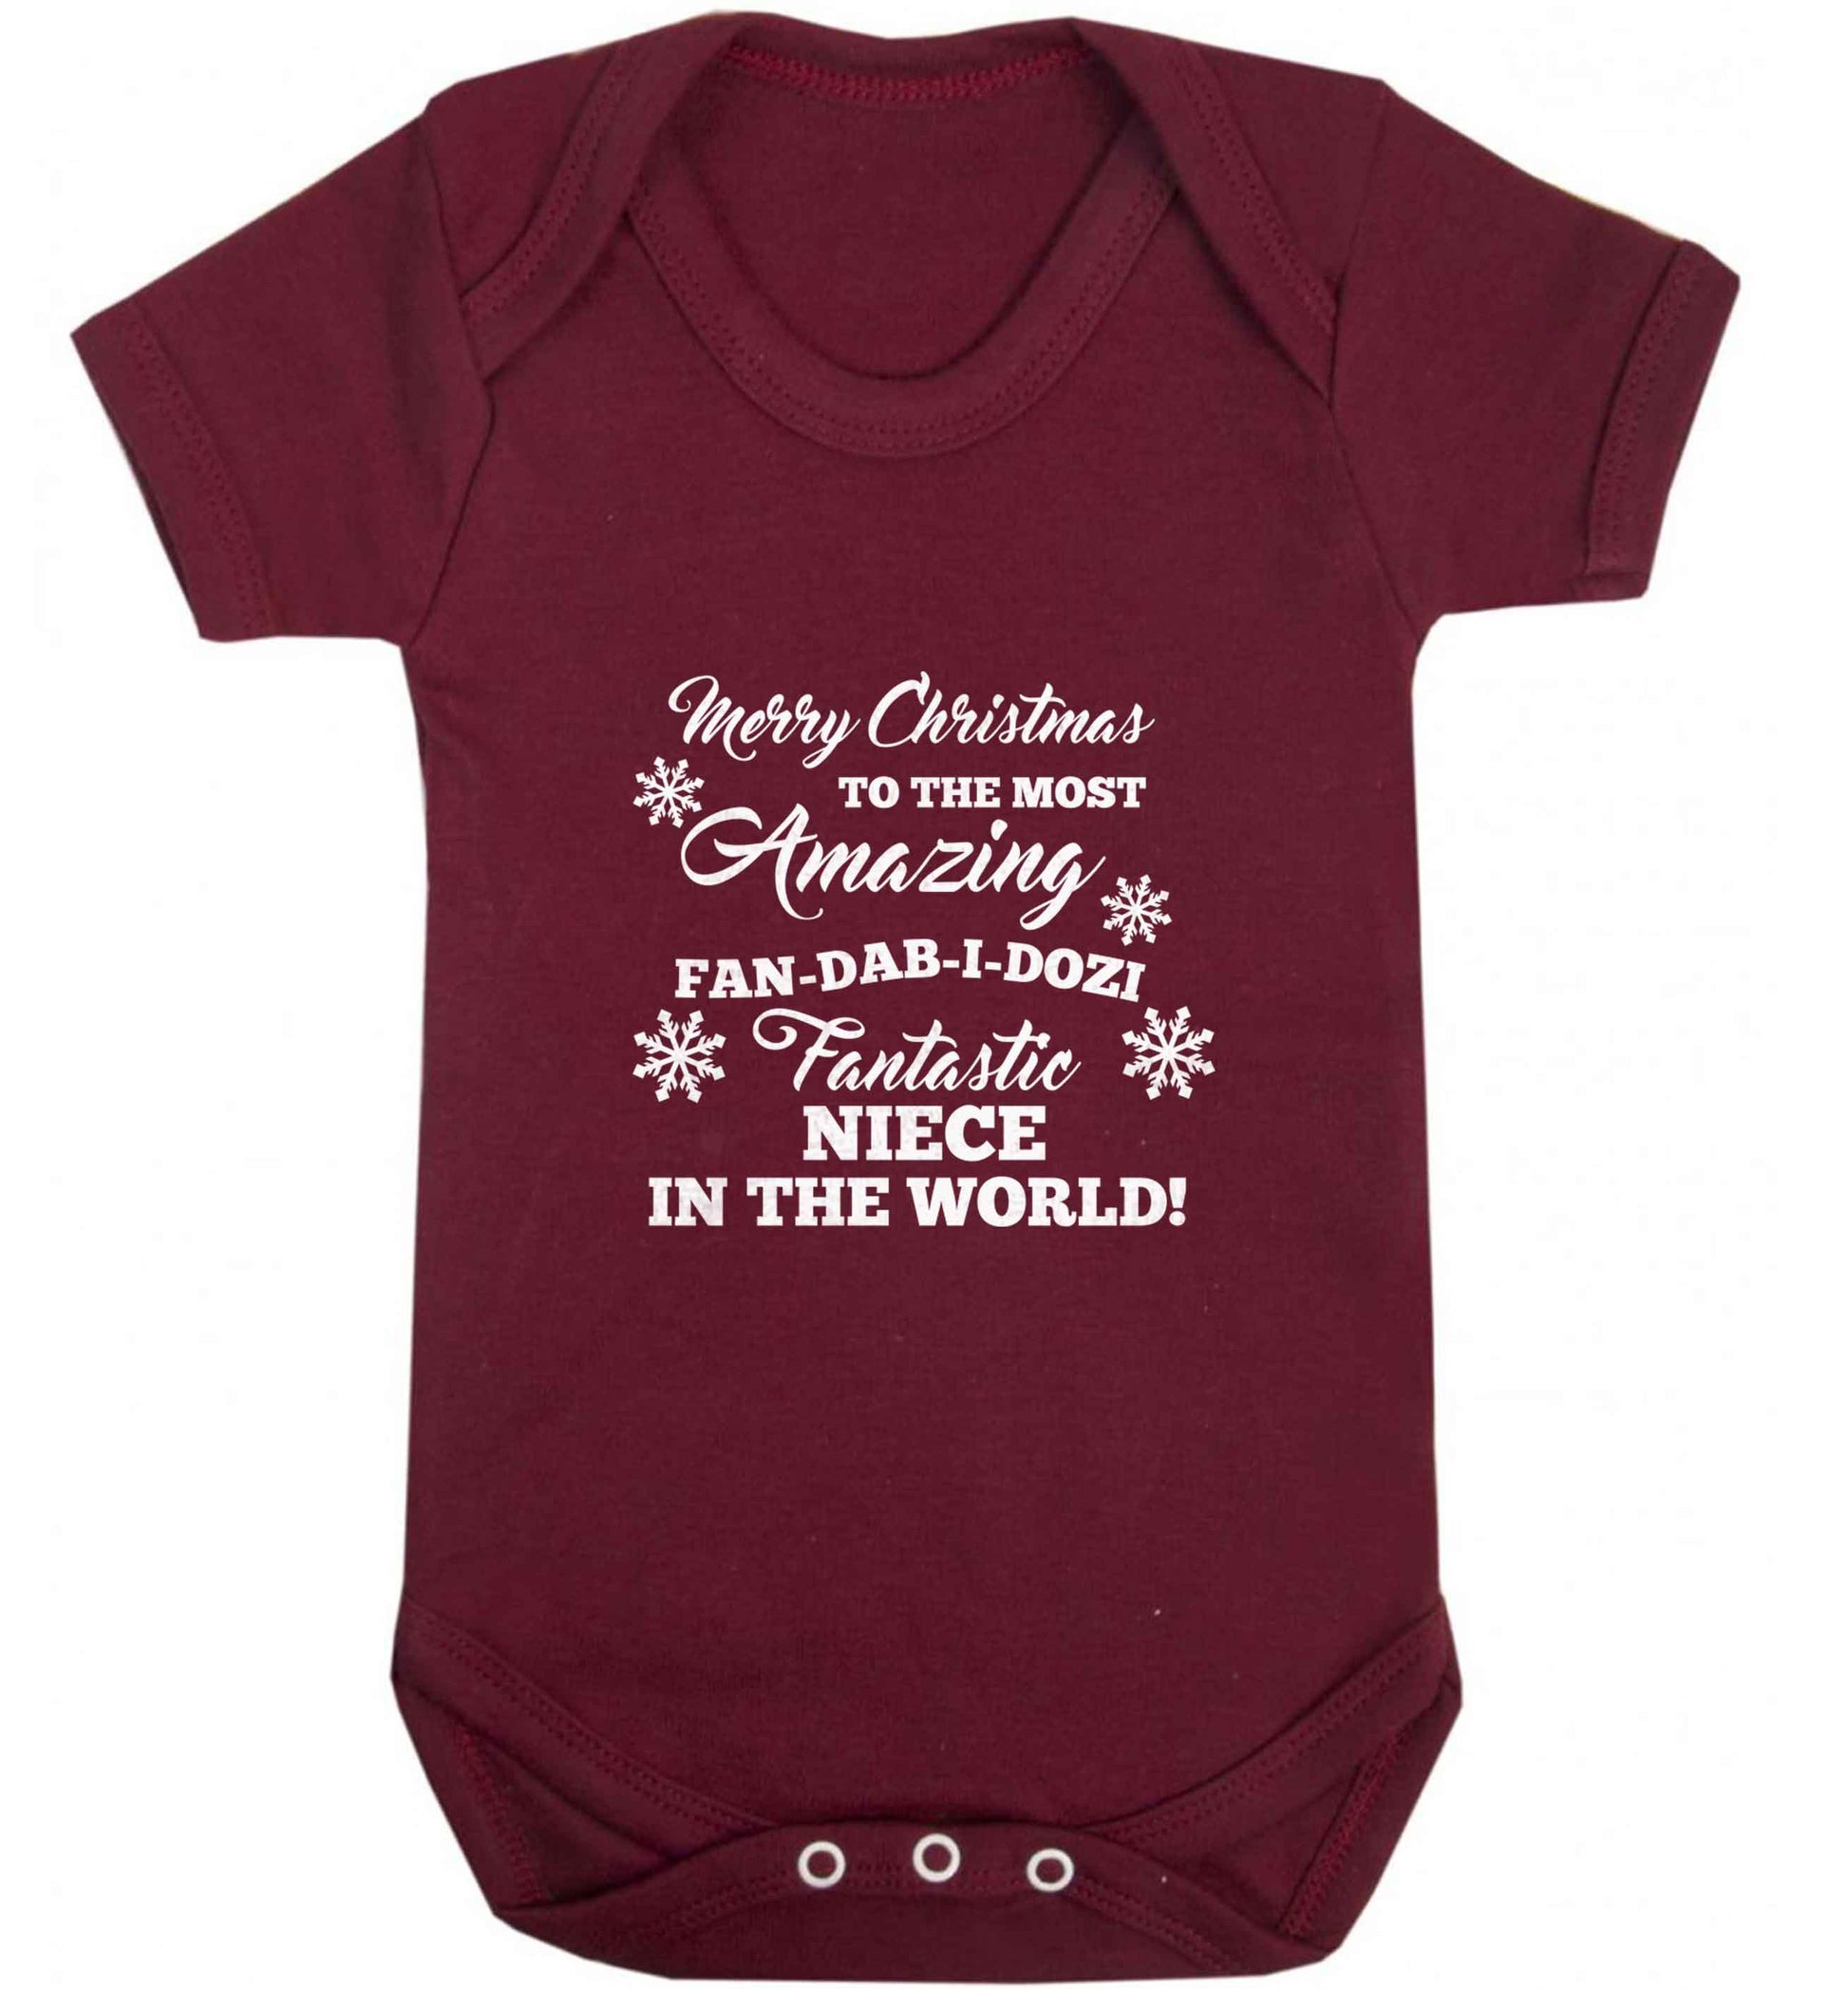 Merry Christmas to the most amazing fan-dab-i-dozi fantasic Niece in the world baby vest maroon 18-24 months